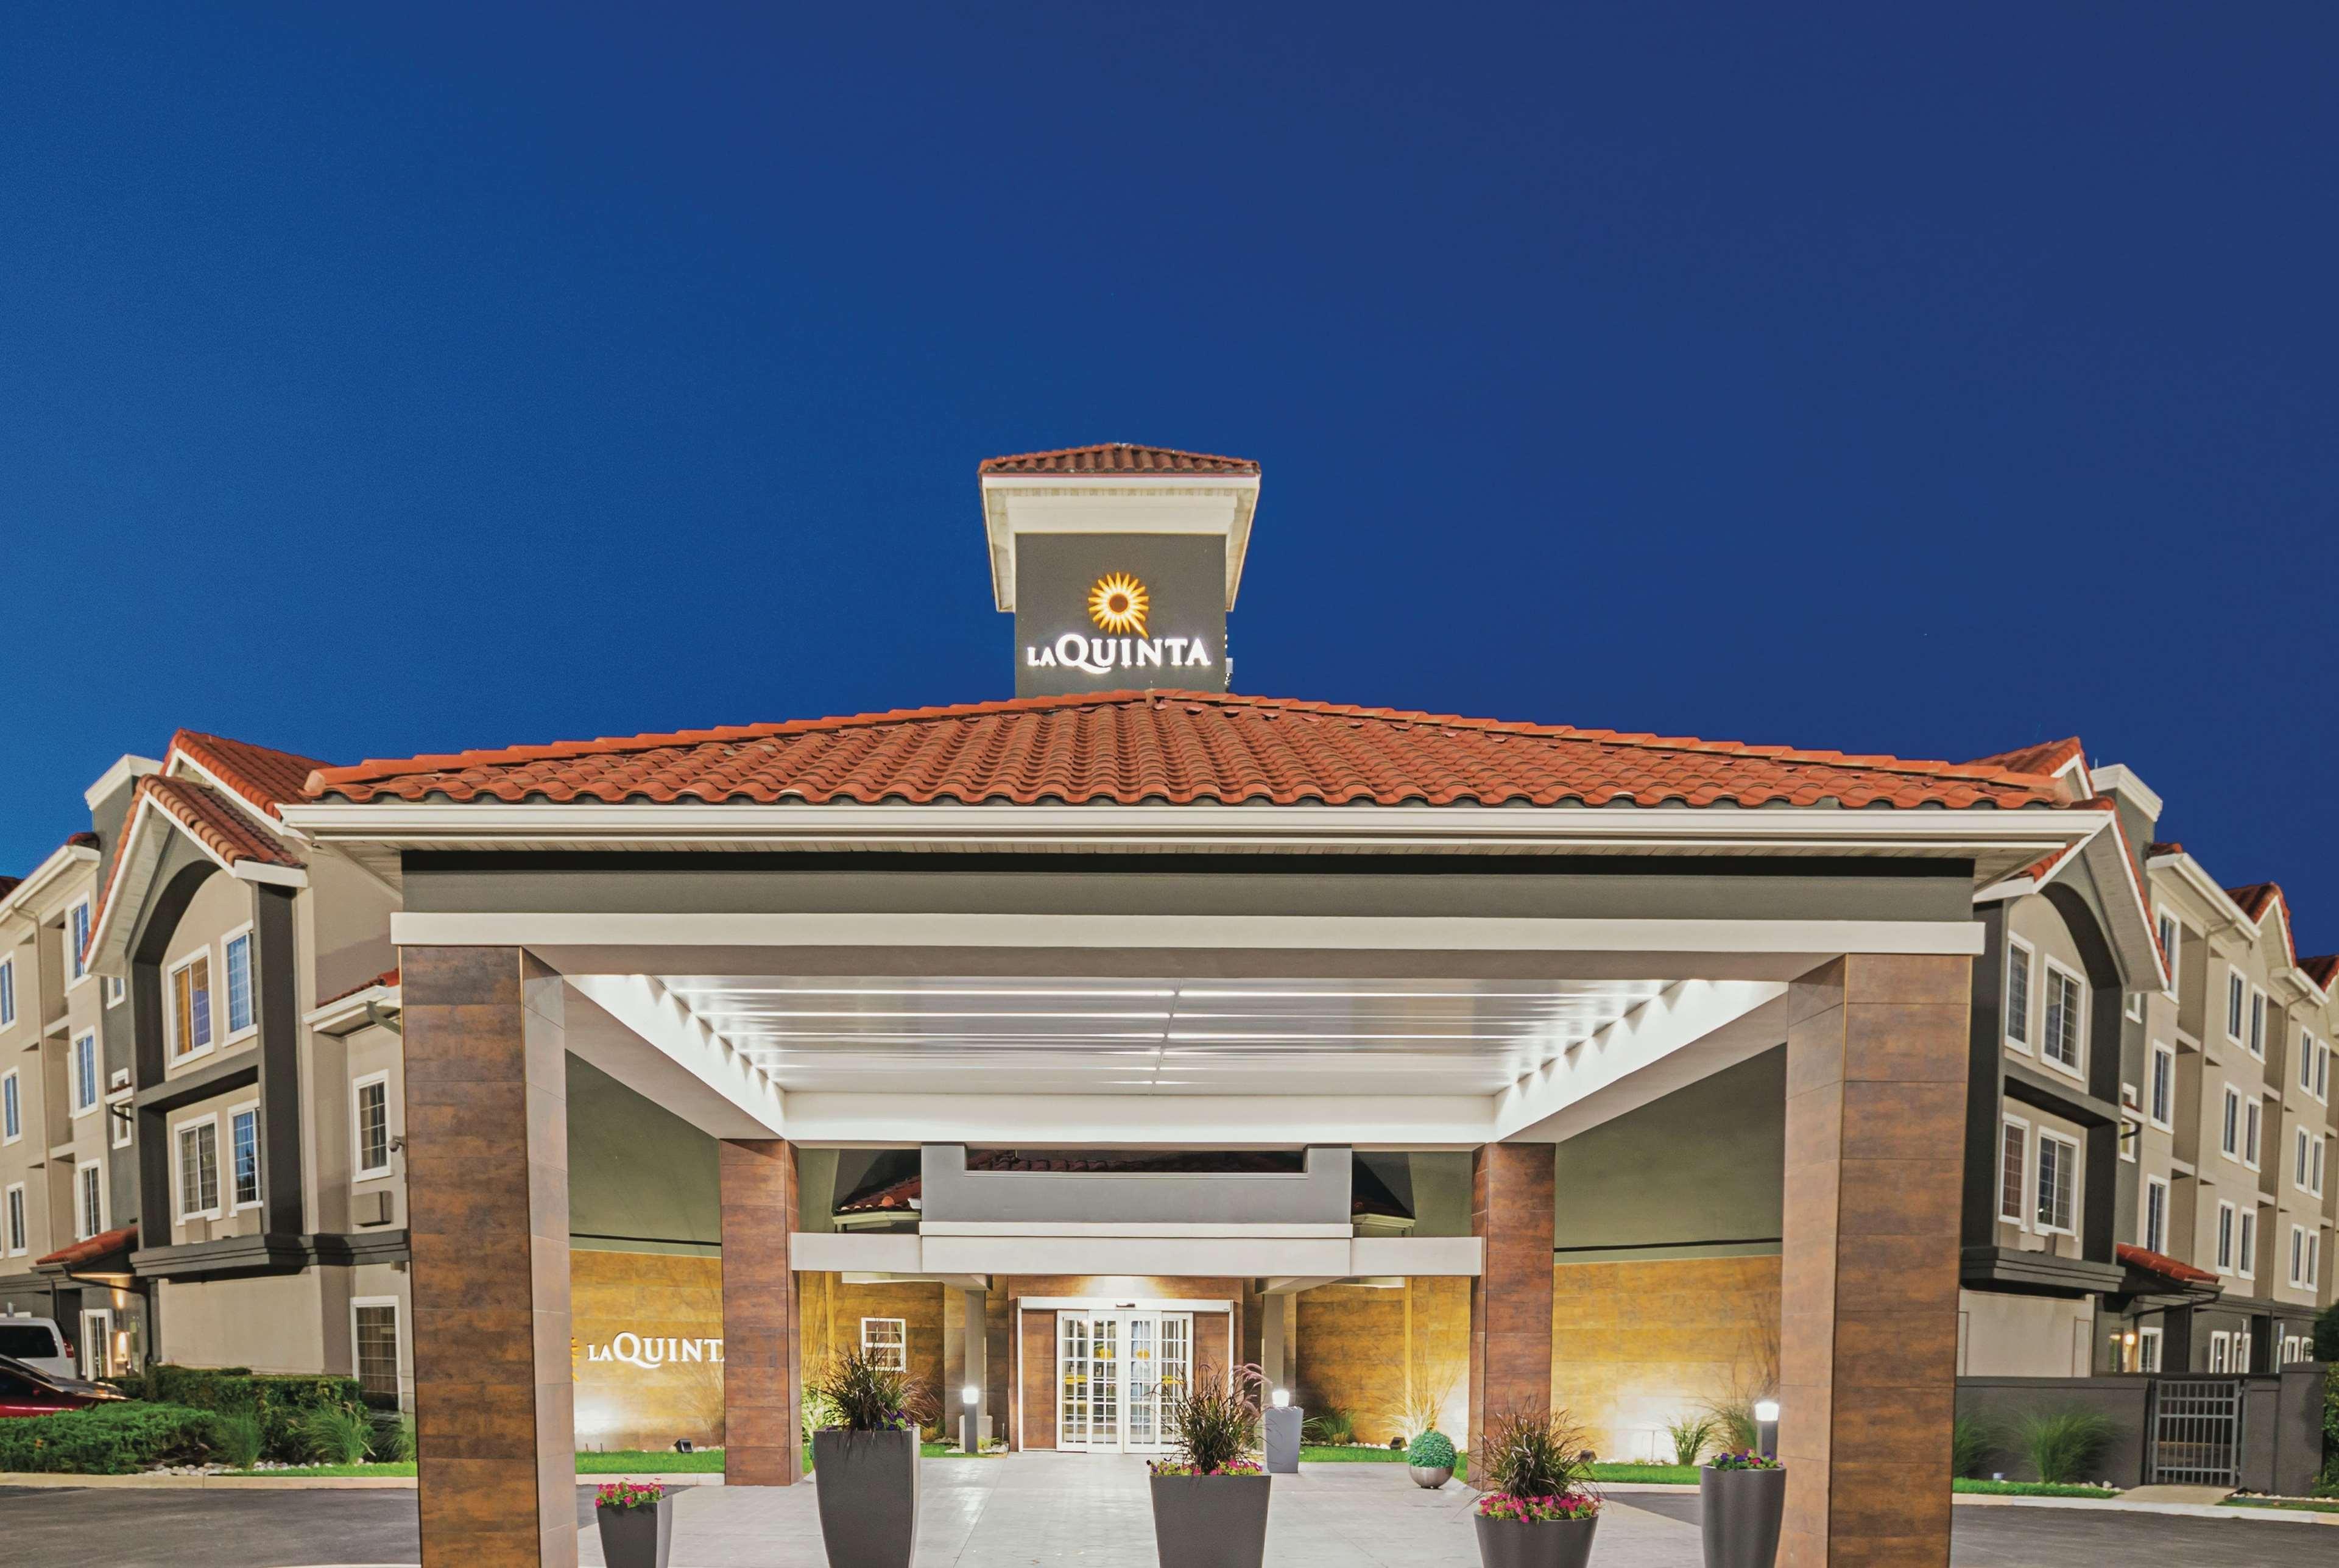 HOTEL LA QUINTA BY WYNDHAM FORT WORTH NORTH FORT WORTH, TX 3* (United  States) - from US$ 71 | BOOKED